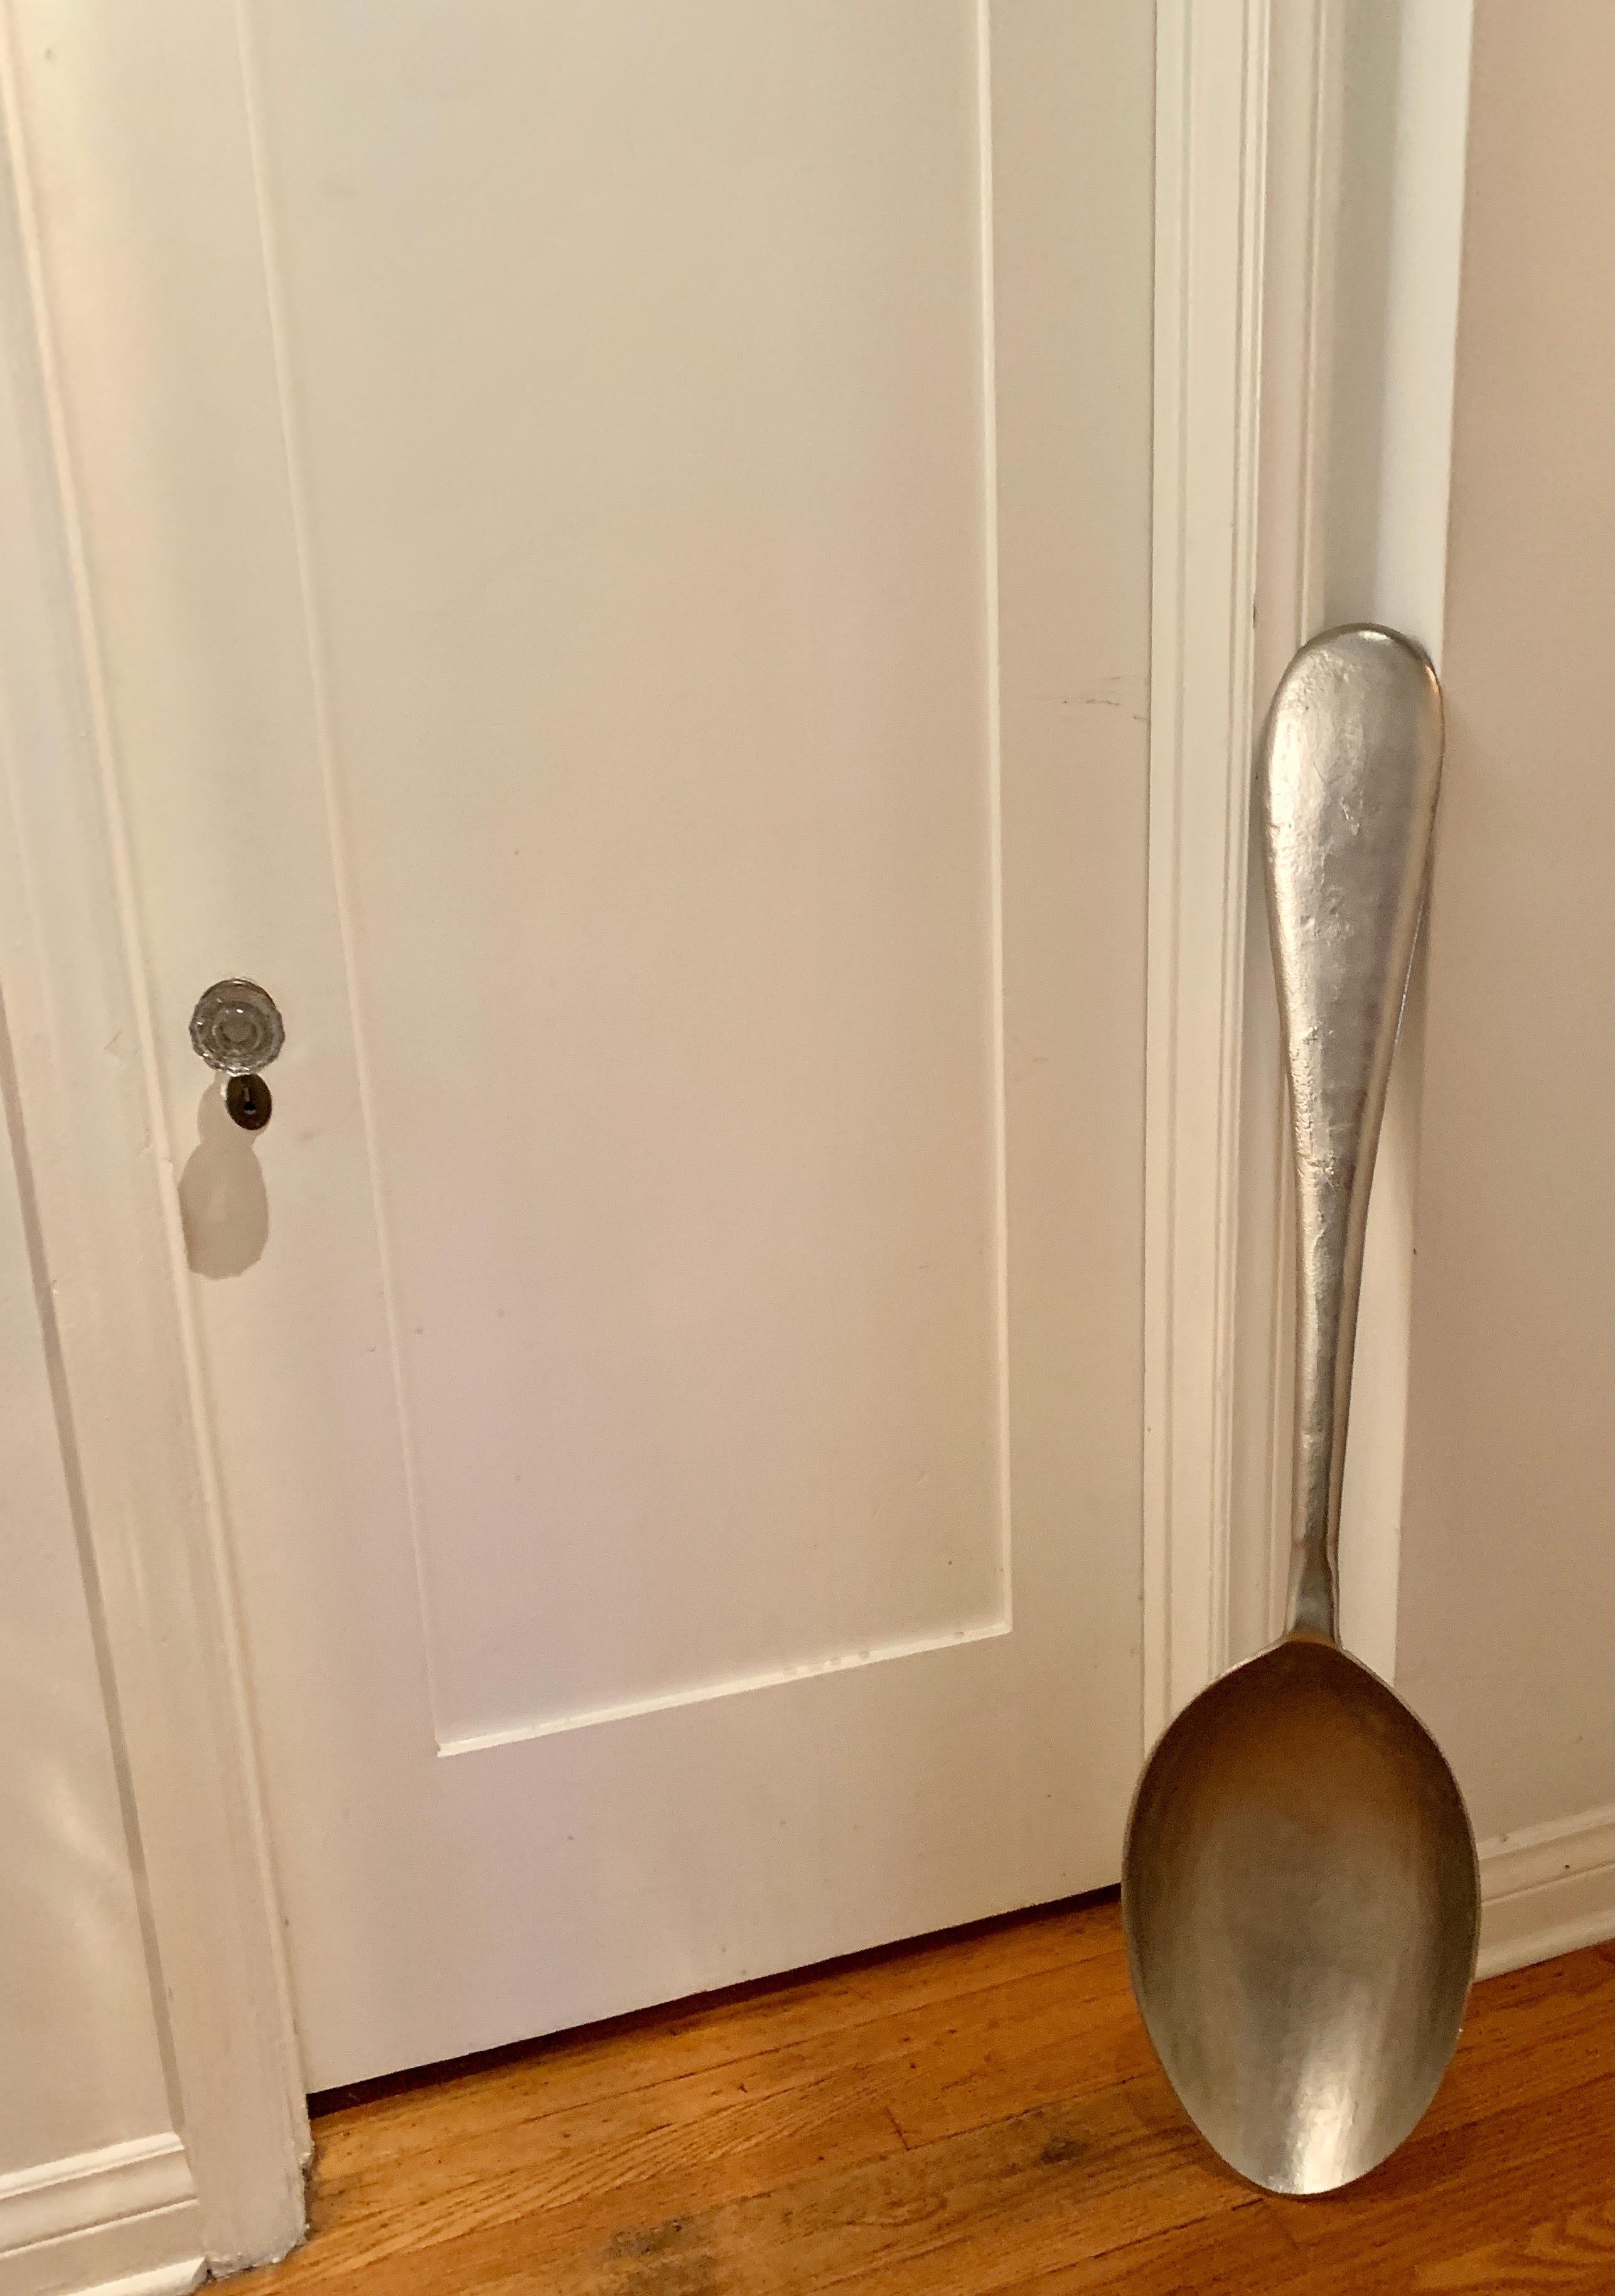 A fantastic replica of a spoon by Curtis Jere. The spoon is made of metal and looks identical to a household spoon, however it is huge at 46 Inhes tall... a wonderful addition to a coffee shop, the kitchen, bakery or just as a decorative item. Makes